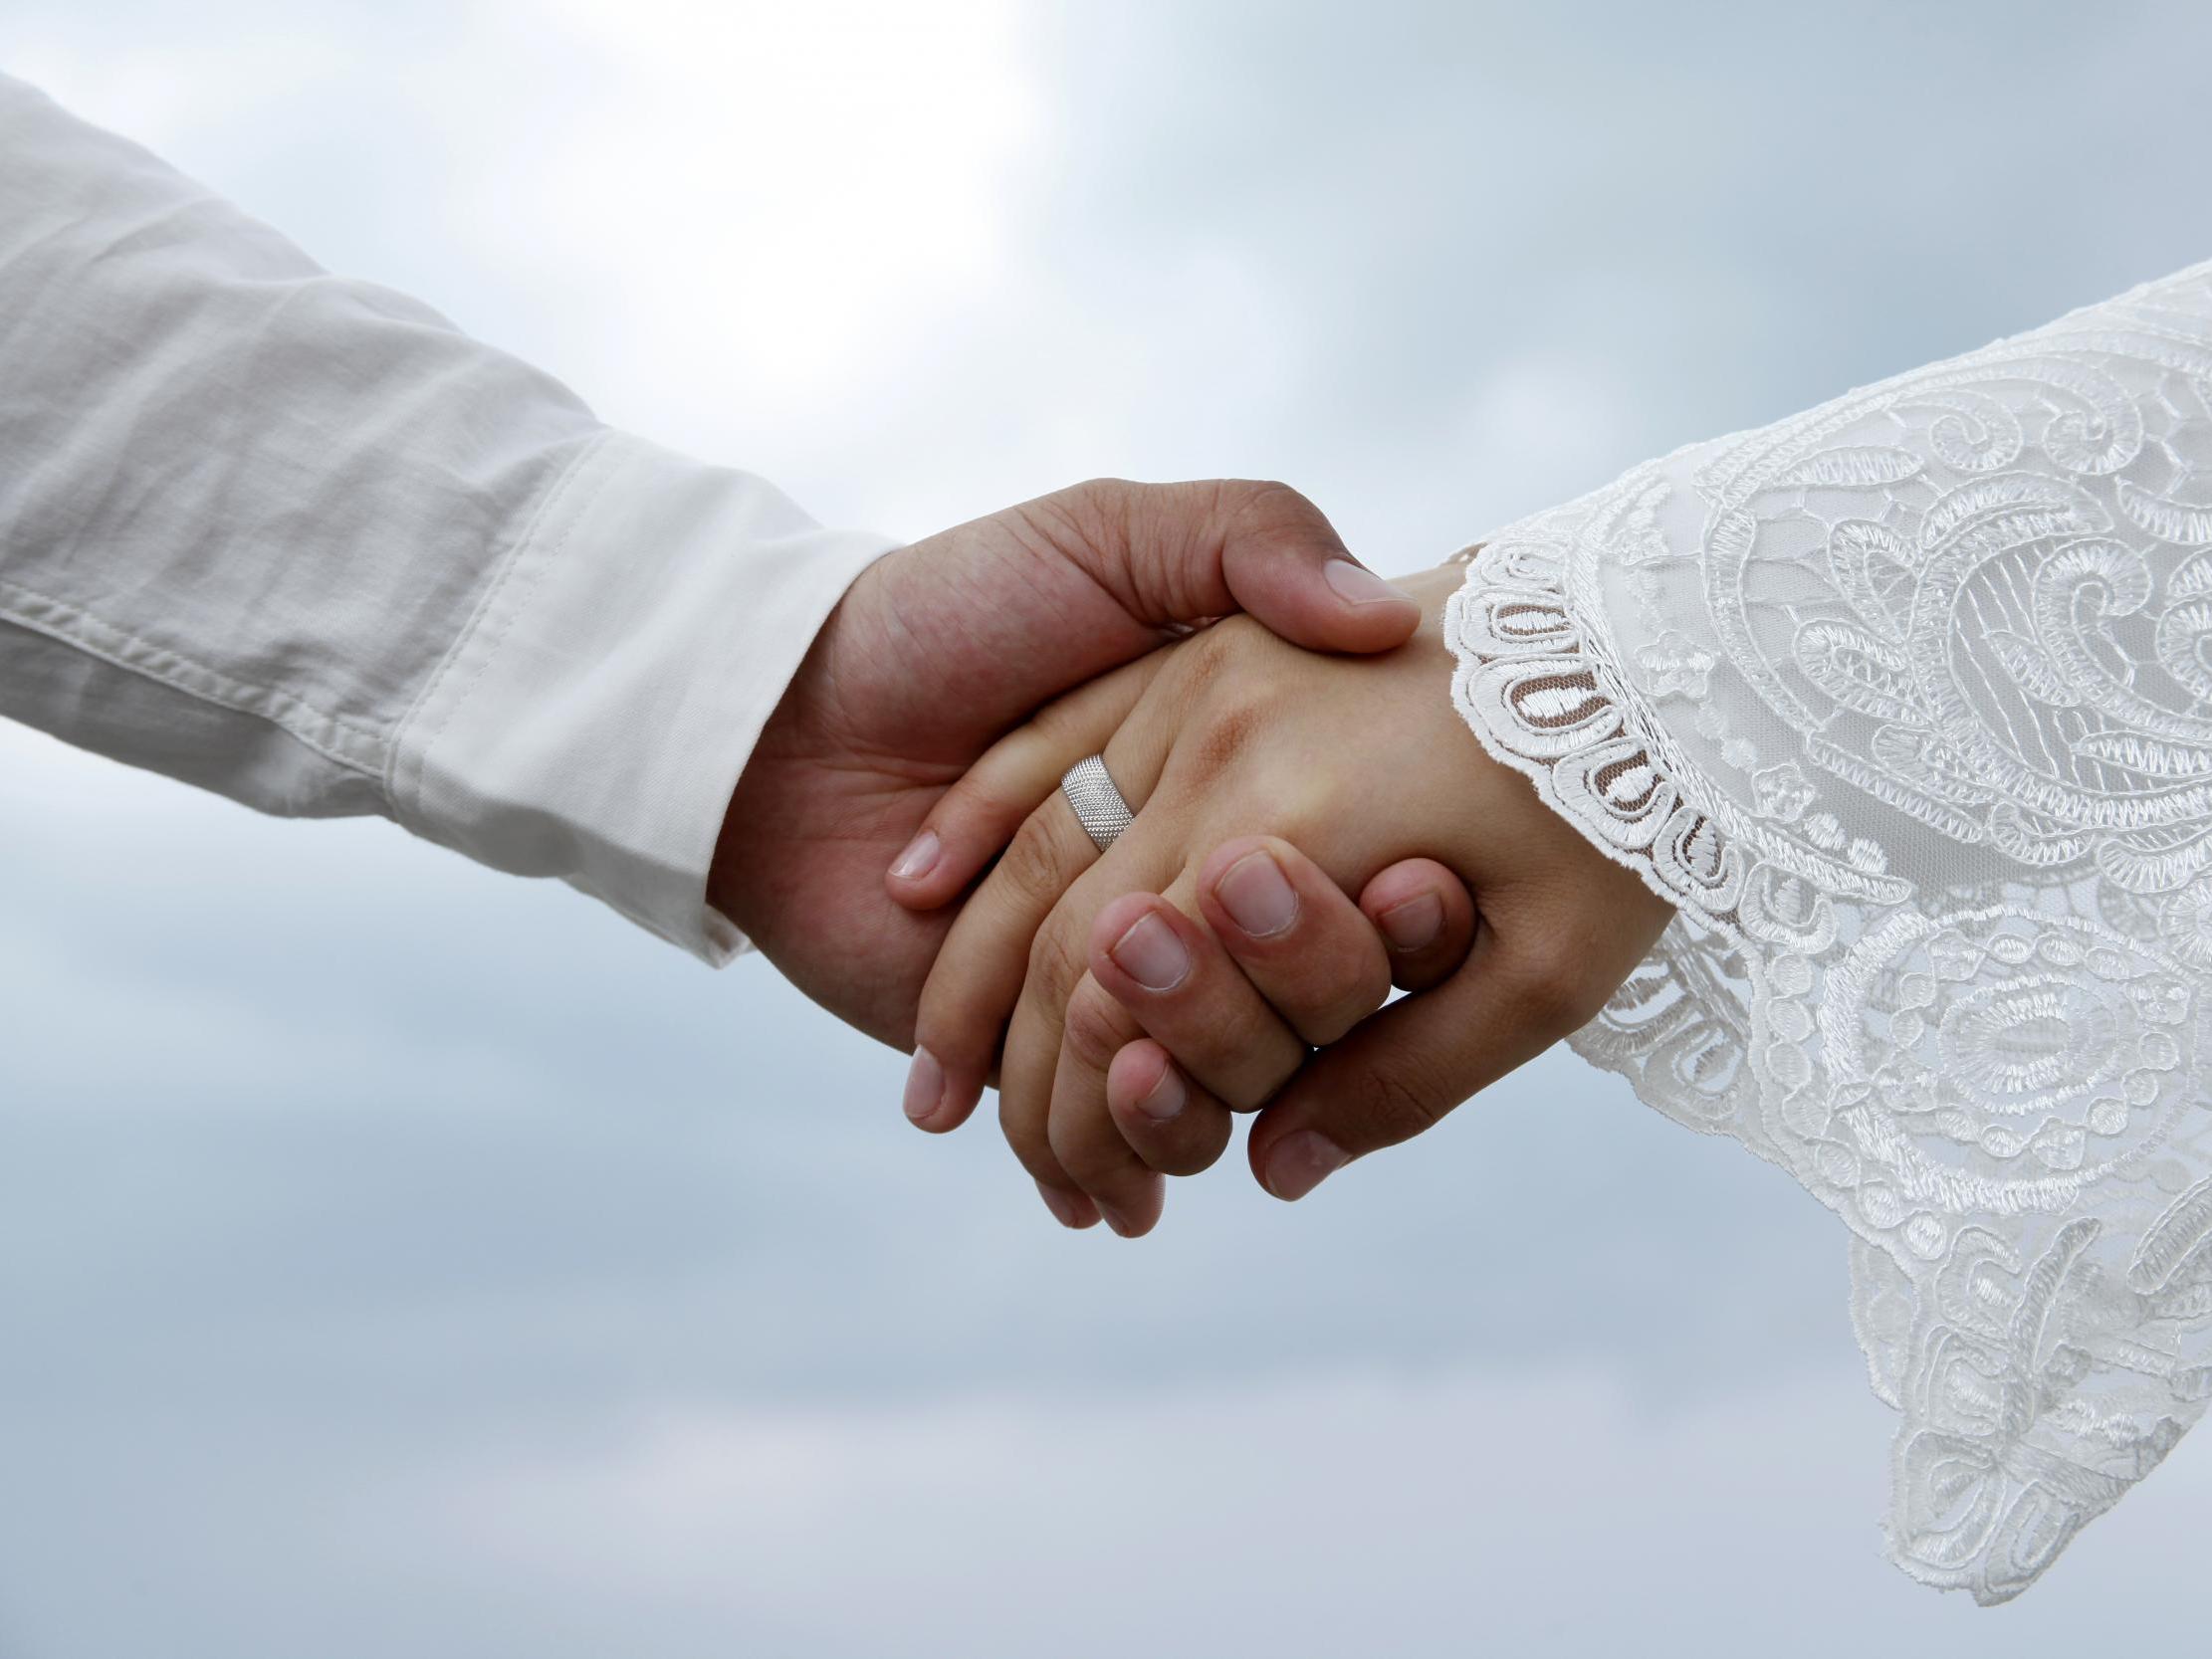 Campaigners have raised concerns about families selling their daughters into marriage